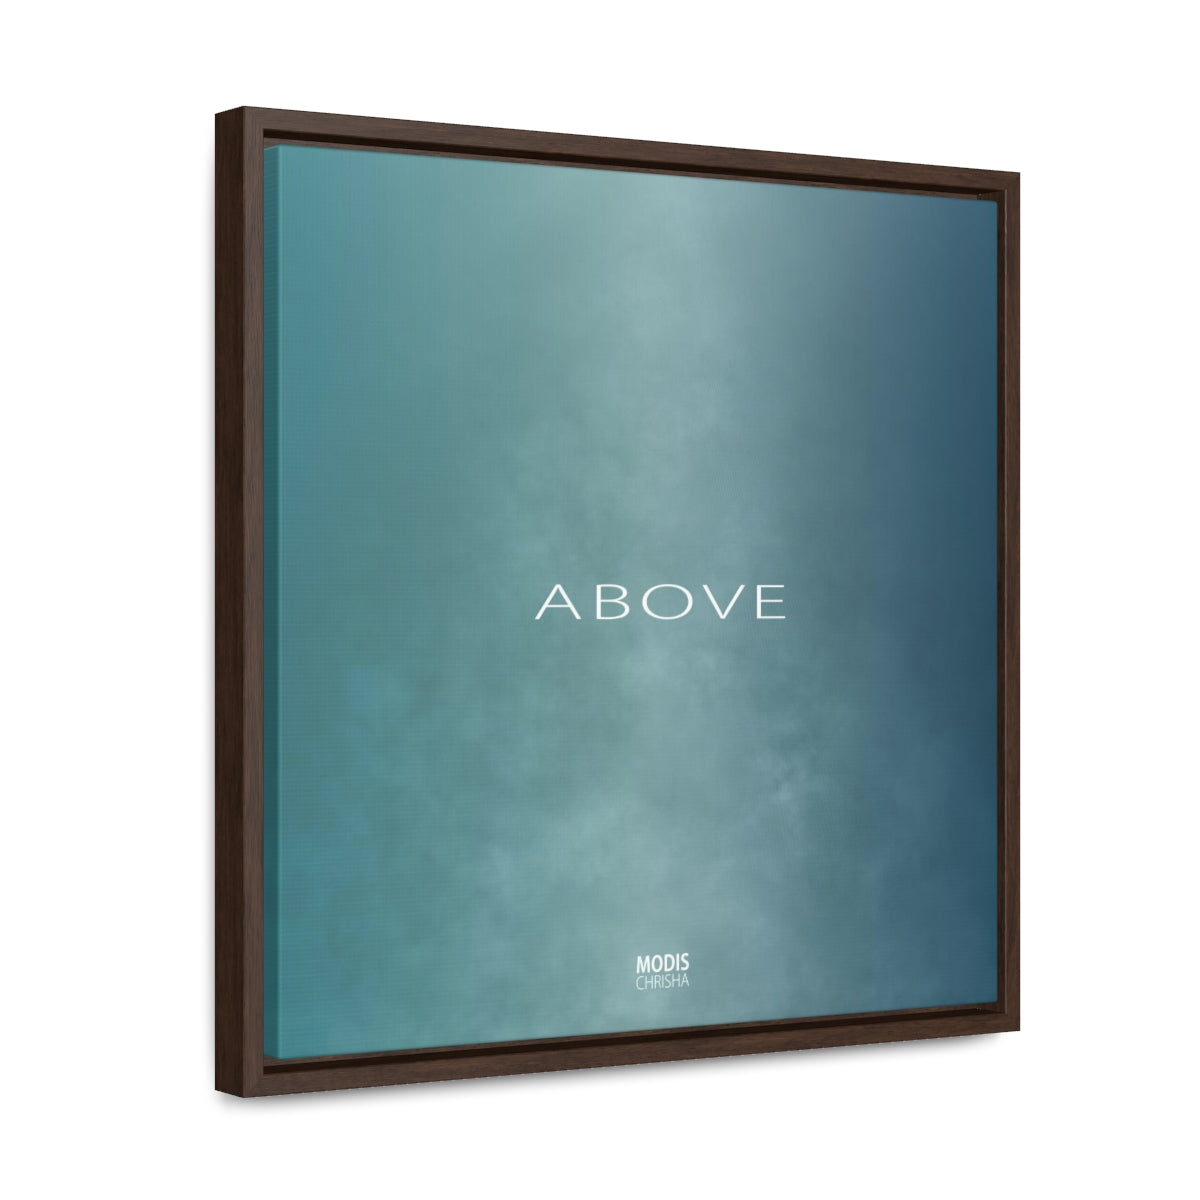 Canvas Gallery Wrap Square Framed 16“ x 16“ - Design Above